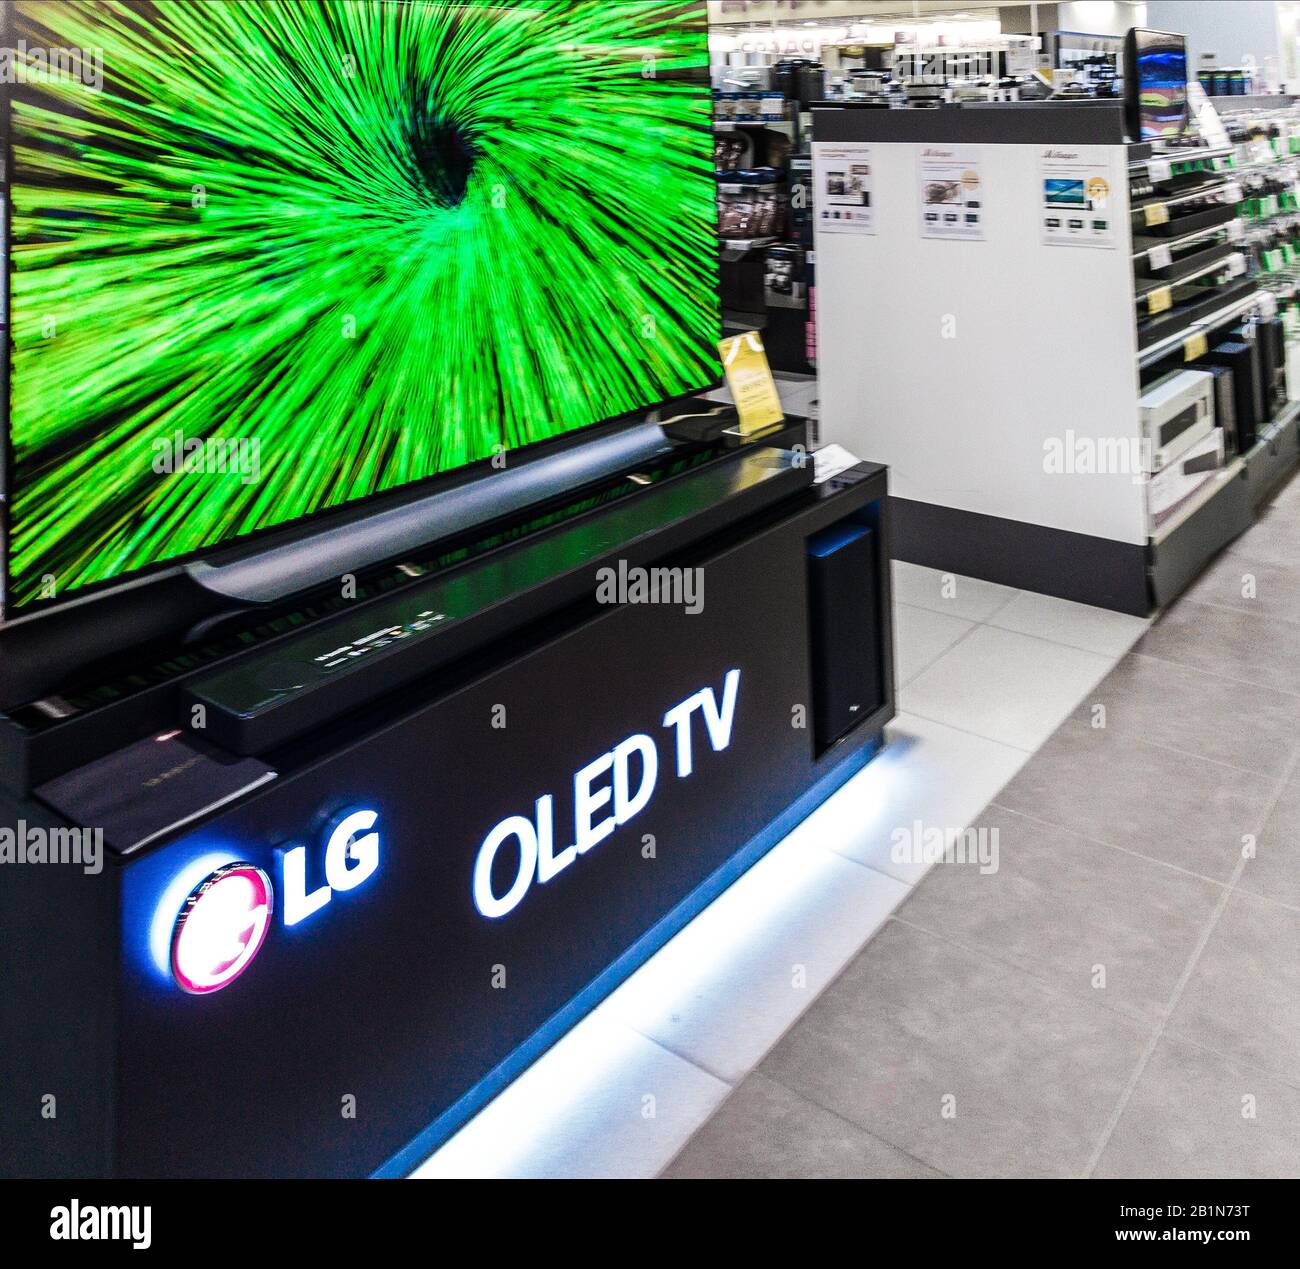 2020: UHD OLED TV LG home theater system, shows the demo pictures in an electronic shop Stock Photo